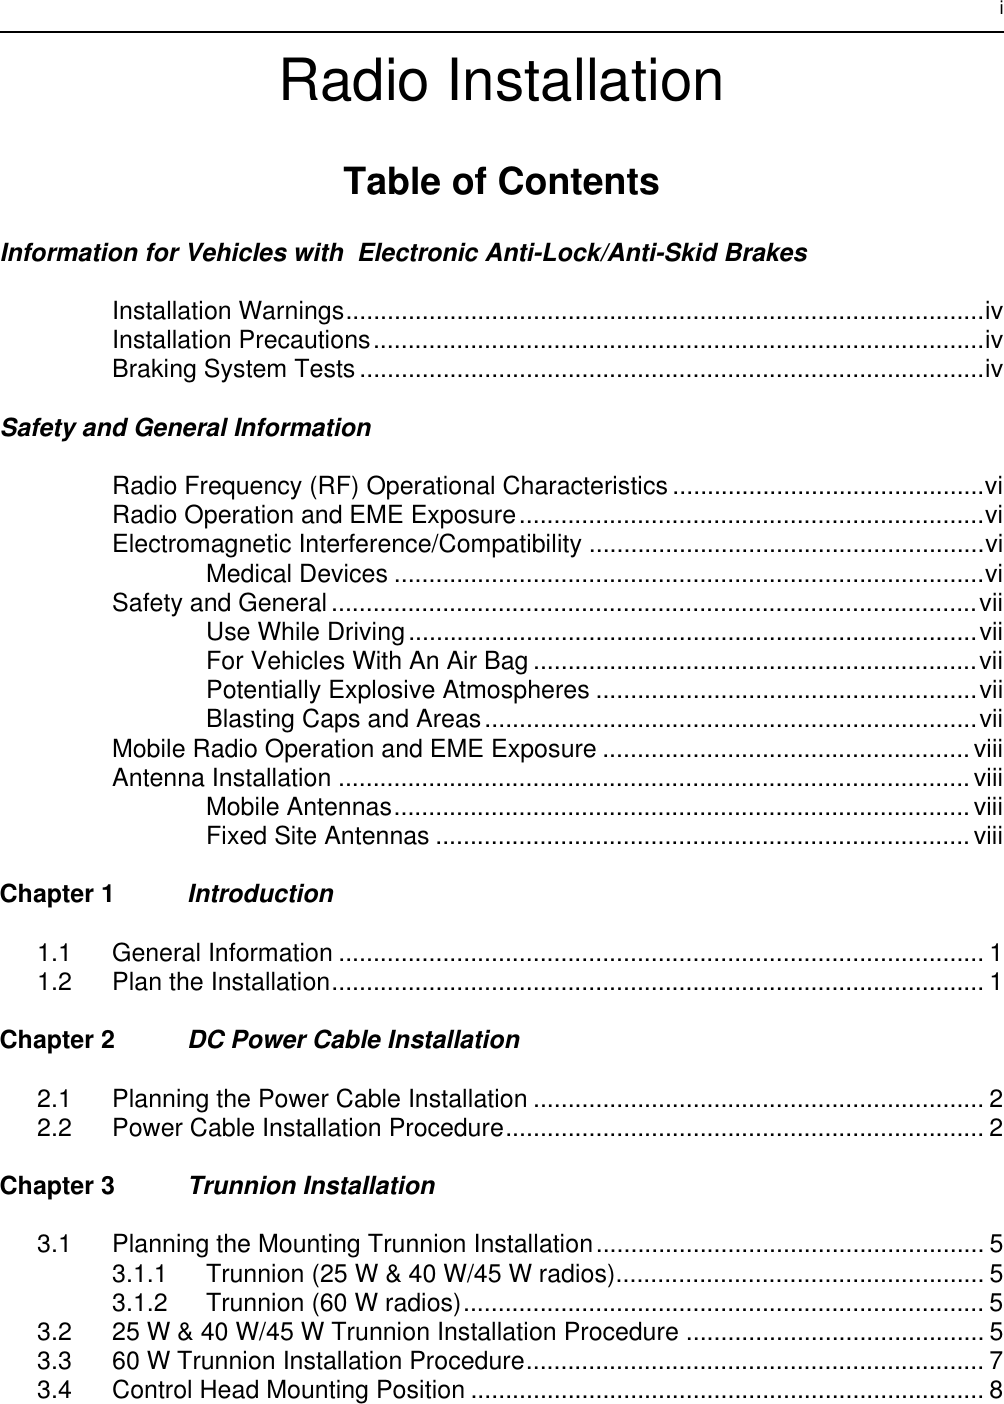 iRadio InstallationTable of ContentsInformation for Vehicles with  Electronic Anti-Lock/Anti-Skid BrakesInstallation Warnings............................................................................................ivInstallation Precautions........................................................................................ivBraking System Tests ..........................................................................................ivSafety and General InformationRadio Frequency (RF) Operational Characteristics.............................................viRadio Operation and EME Exposure...................................................................viElectromagnetic Interference/Compatibility .........................................................viMedical Devices .....................................................................................viSafety and General .............................................................................................viiUse While Driving..................................................................................viiFor Vehicles With An Air Bag ................................................................viiPotentially Explosive Atmospheres .......................................................viiBlasting Caps and Areas.......................................................................viiMobile Radio Operation and EME Exposure .....................................................viiiAntenna Installation ...........................................................................................viiiMobile Antennas...................................................................................viiiFixed Site Antennas .............................................................................viiiChapter 1 Introduction1.1 General Information ............................................................................................. 11.2 Plan the Installation.............................................................................................. 1Chapter 2 DC Power Cable Installation2.1 Planning the Power Cable Installation ................................................................. 22.2 Power Cable Installation Procedure..................................................................... 2Chapter 3 Trunnion Installation3.1 Planning the Mounting Trunnion Installation........................................................ 53.1.1 Trunnion (25 W &amp; 40 W/45 W radios)..................................................... 53.1.2 Trunnion (60 W radios)........................................................................... 53.2 25 W &amp; 40 W/45 W Trunnion Installation Procedure ........................................... 53.3 60 W Trunnion Installation Procedure.................................................................. 73.4 Control Head Mounting Position .......................................................................... 8